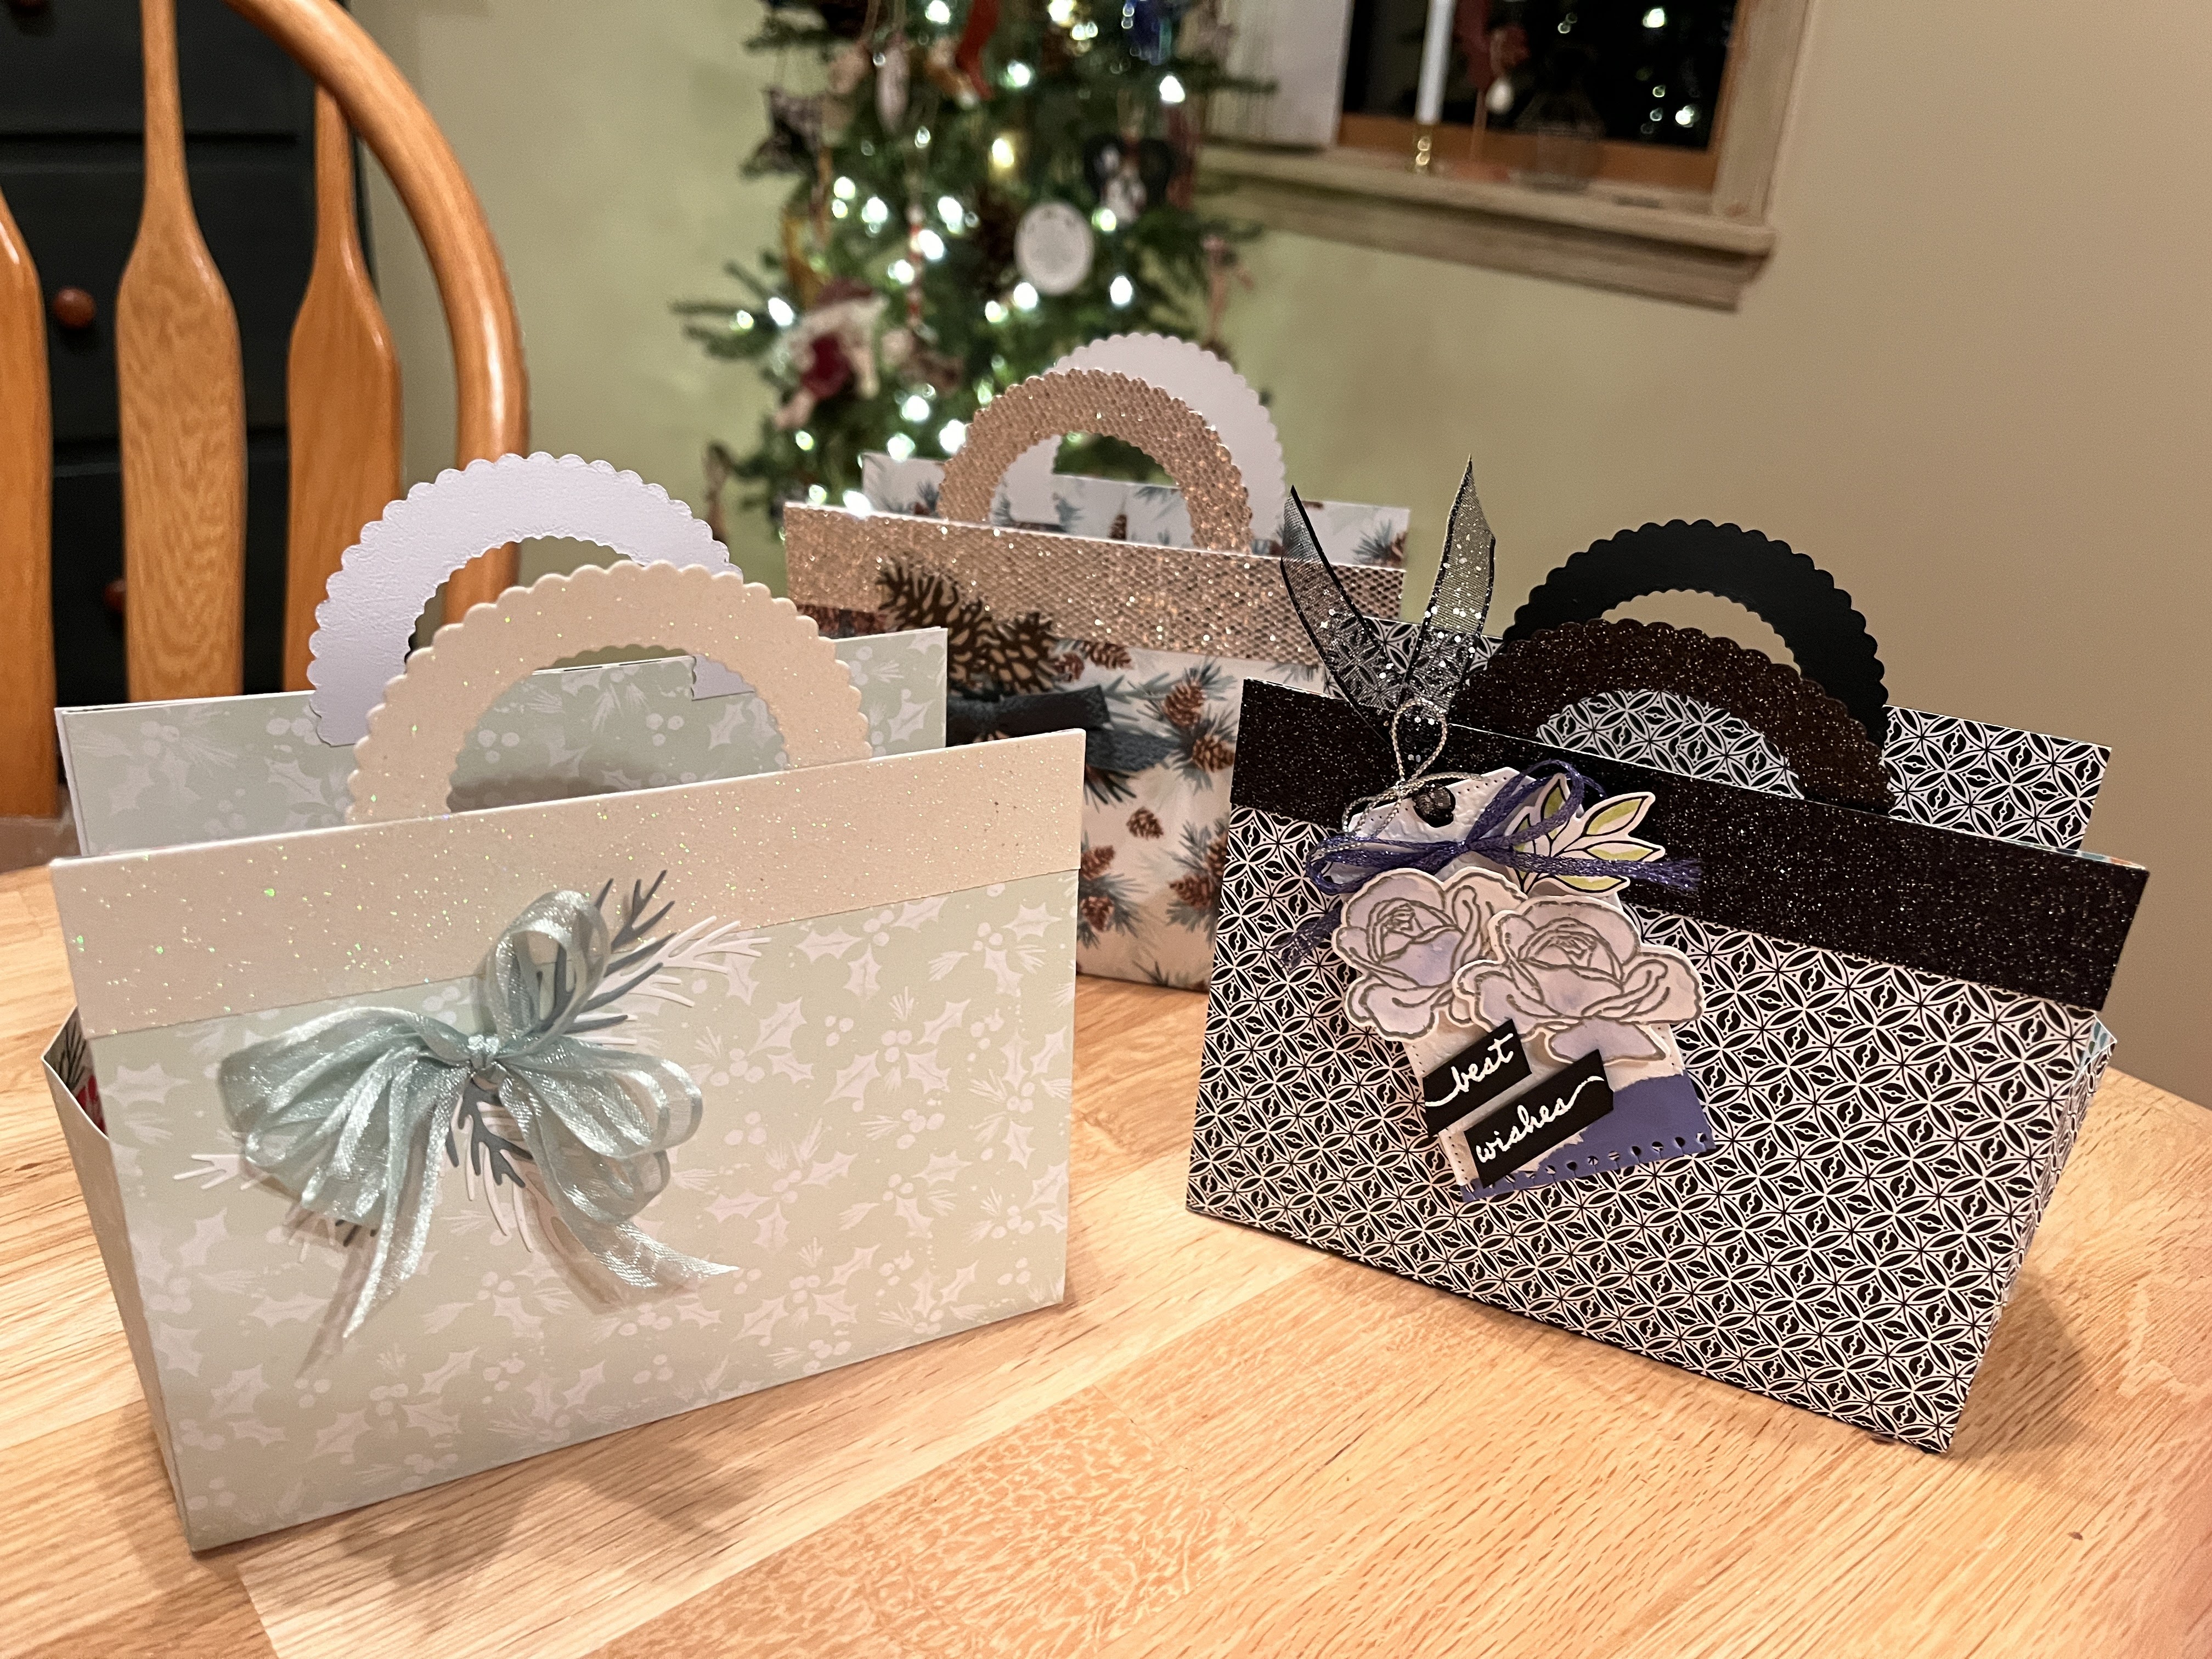 Top 5 Purse Friendly Christmas Gifts That Aren't Wine - Mother Distracted